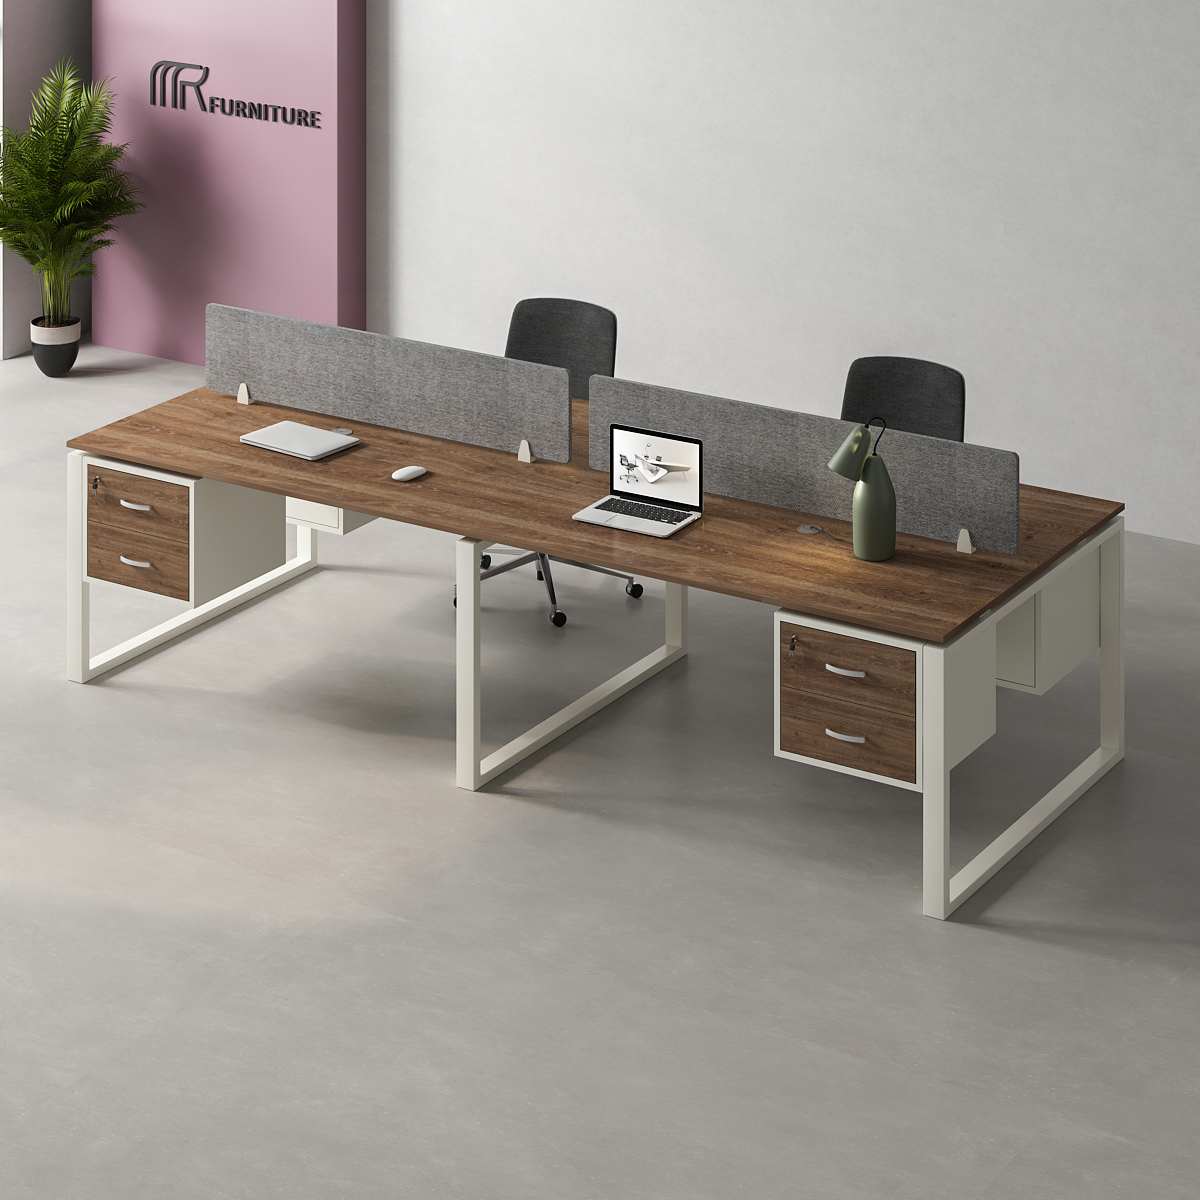 Vital Benefits Of Customized Office Furniture